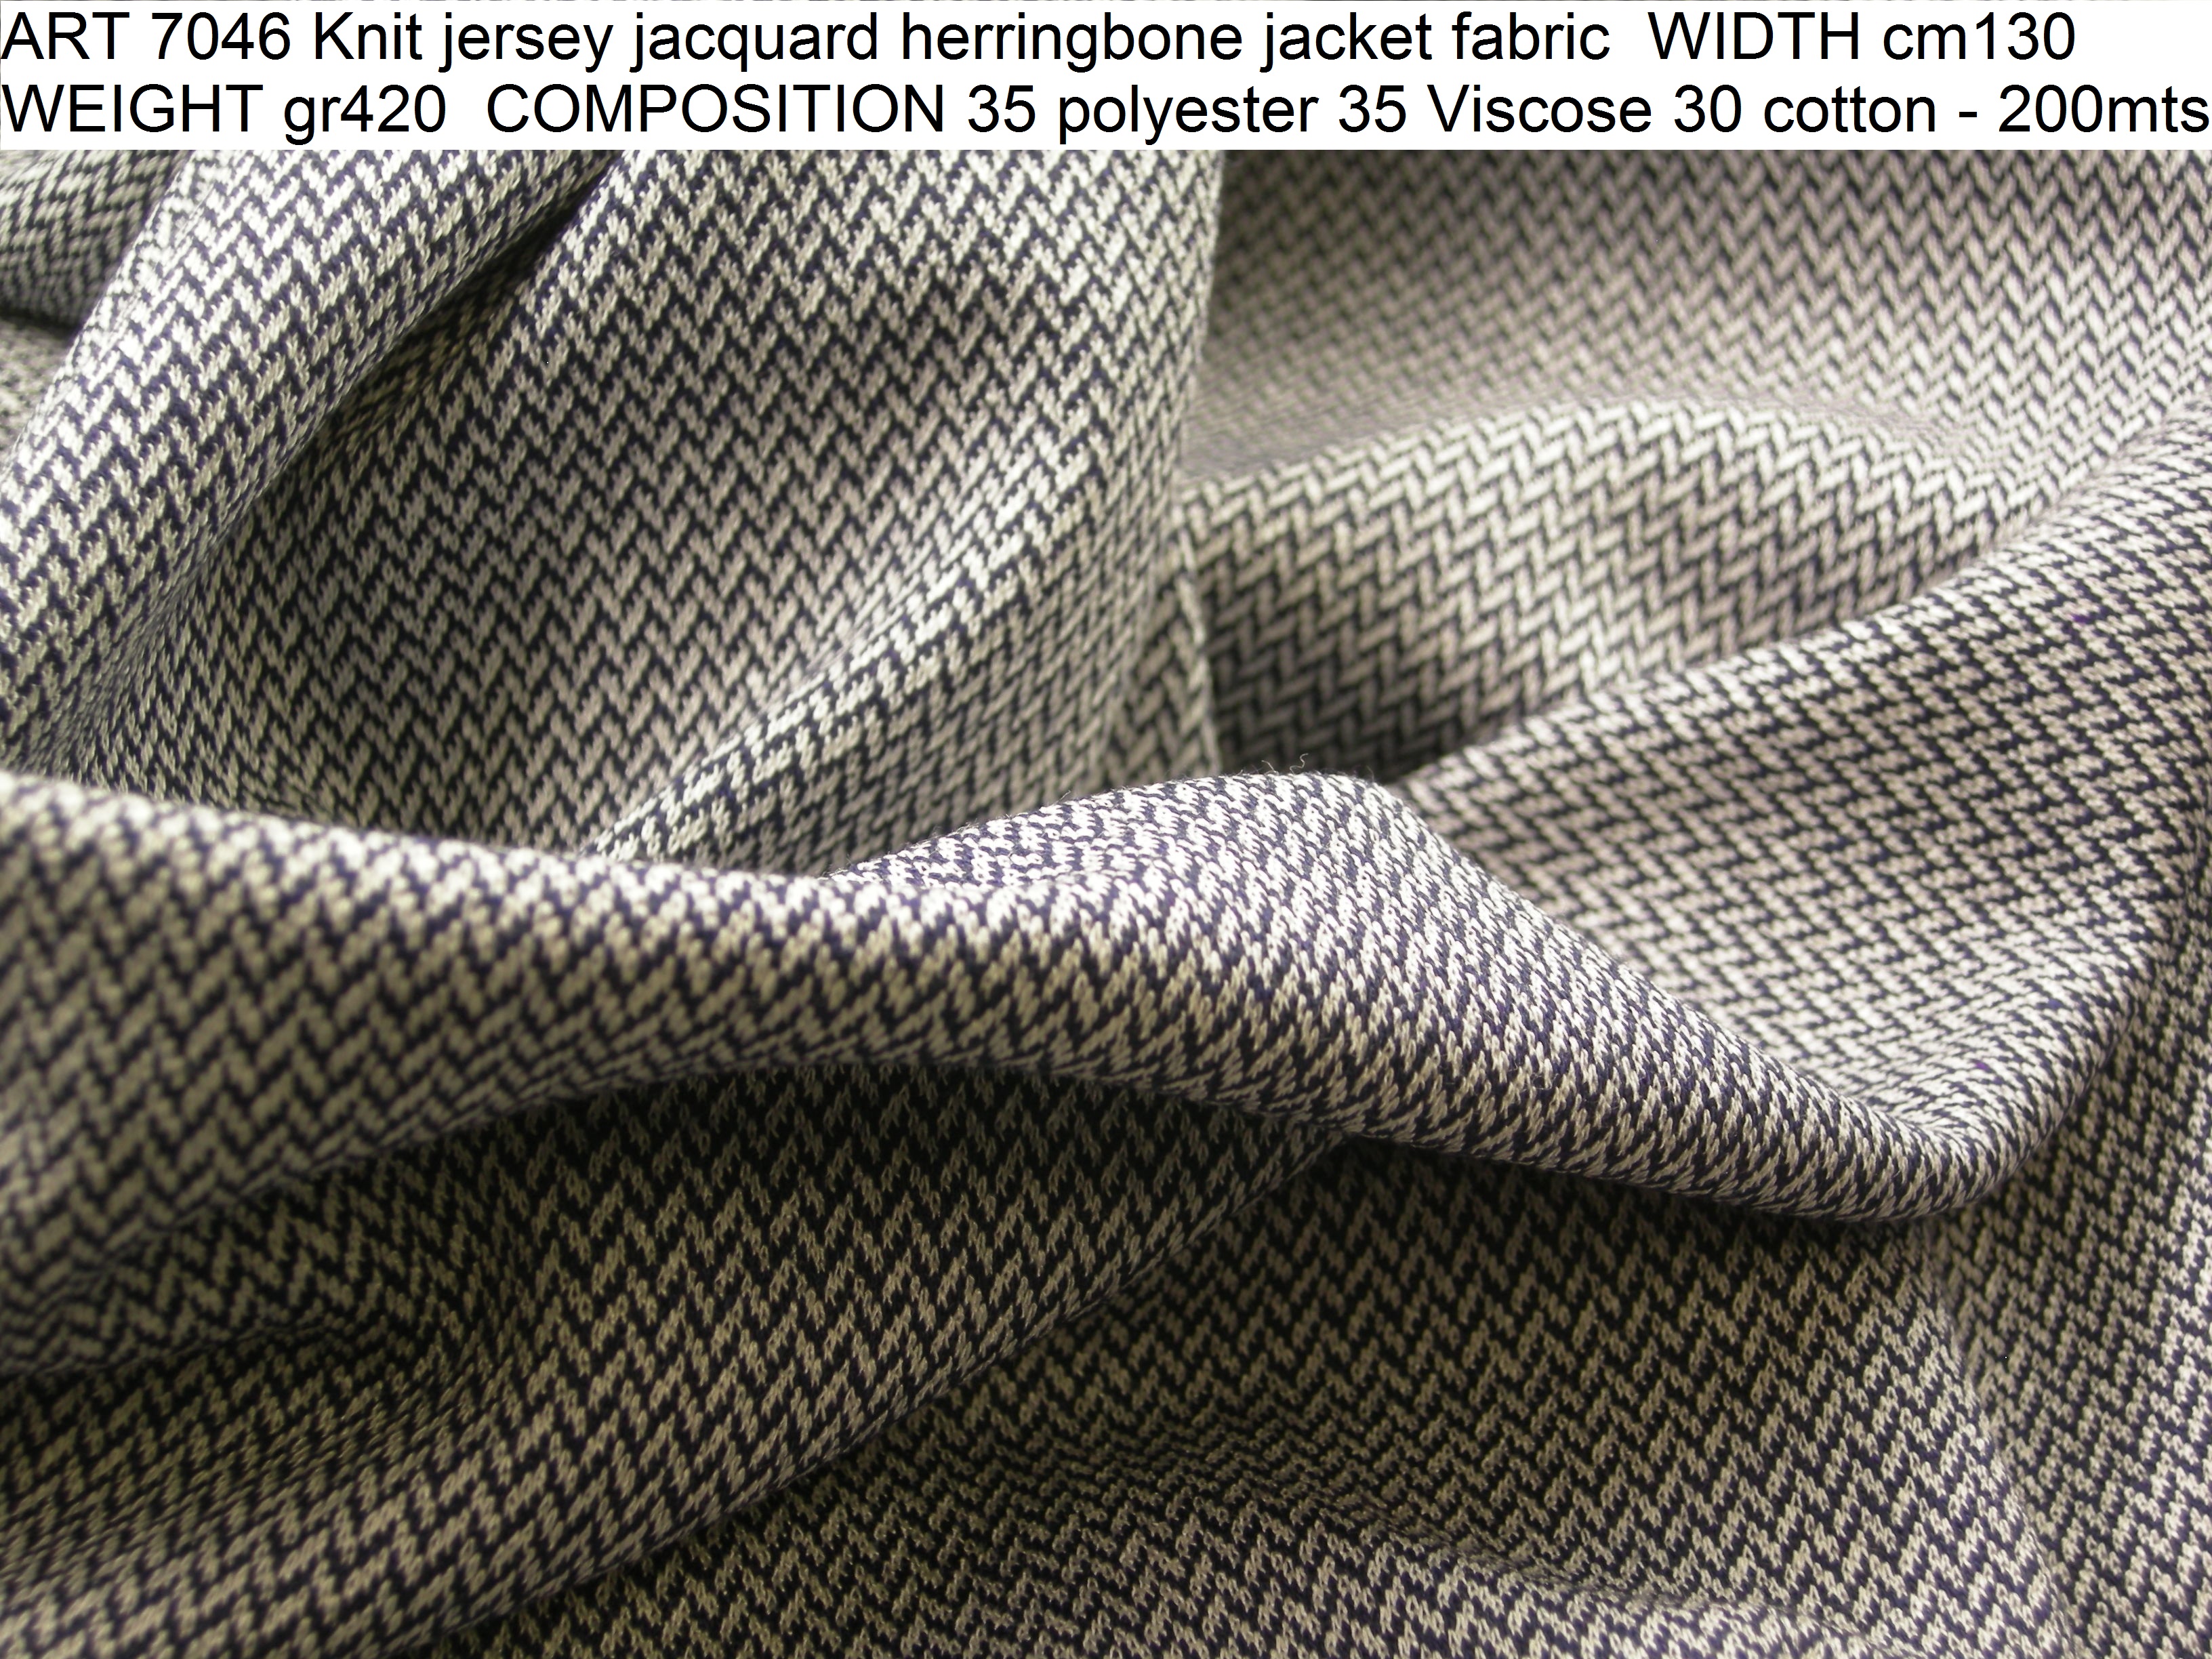 ART 7046 Knit jersey jacquard herringbone jacket fabric WIDTH cm130 WEIGHT gr420 COMPOSITION 35 polyester 35 Viscose 30 cotton - 200mts